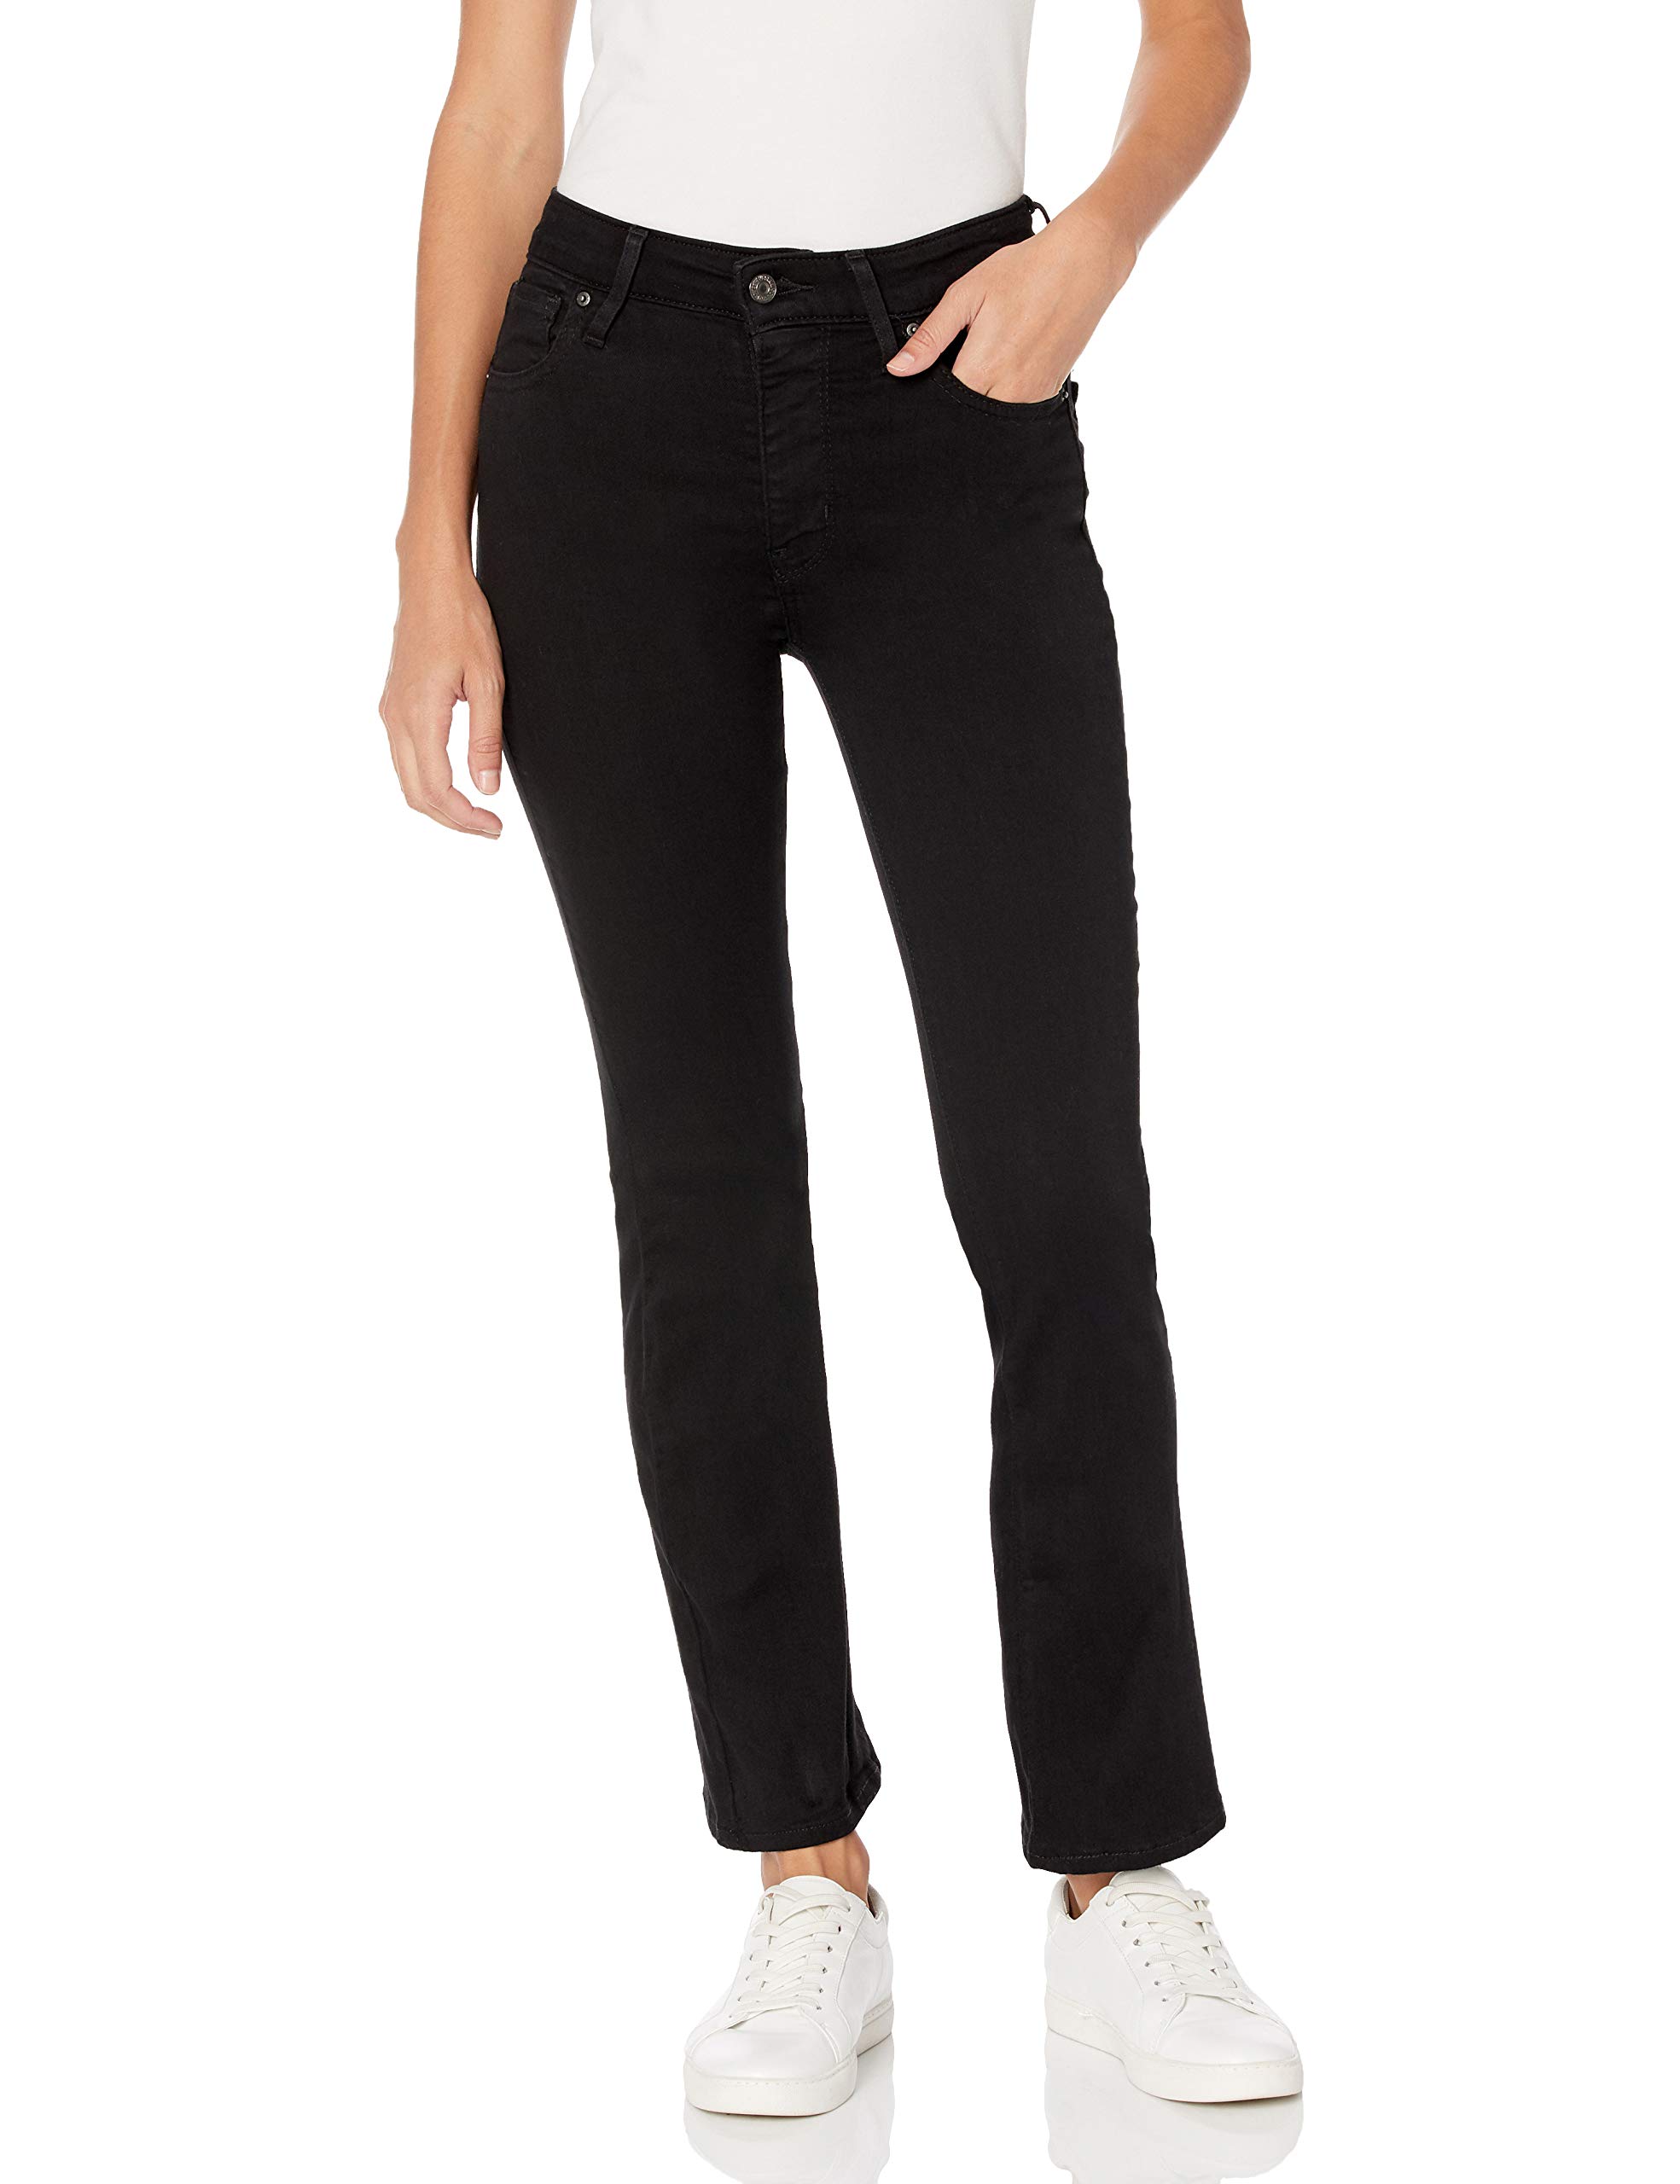 Levi's Women's 725 High Rise Bootcut Jeans (Soft Black) $21 + Free Shipping w/ Prime or on $35+